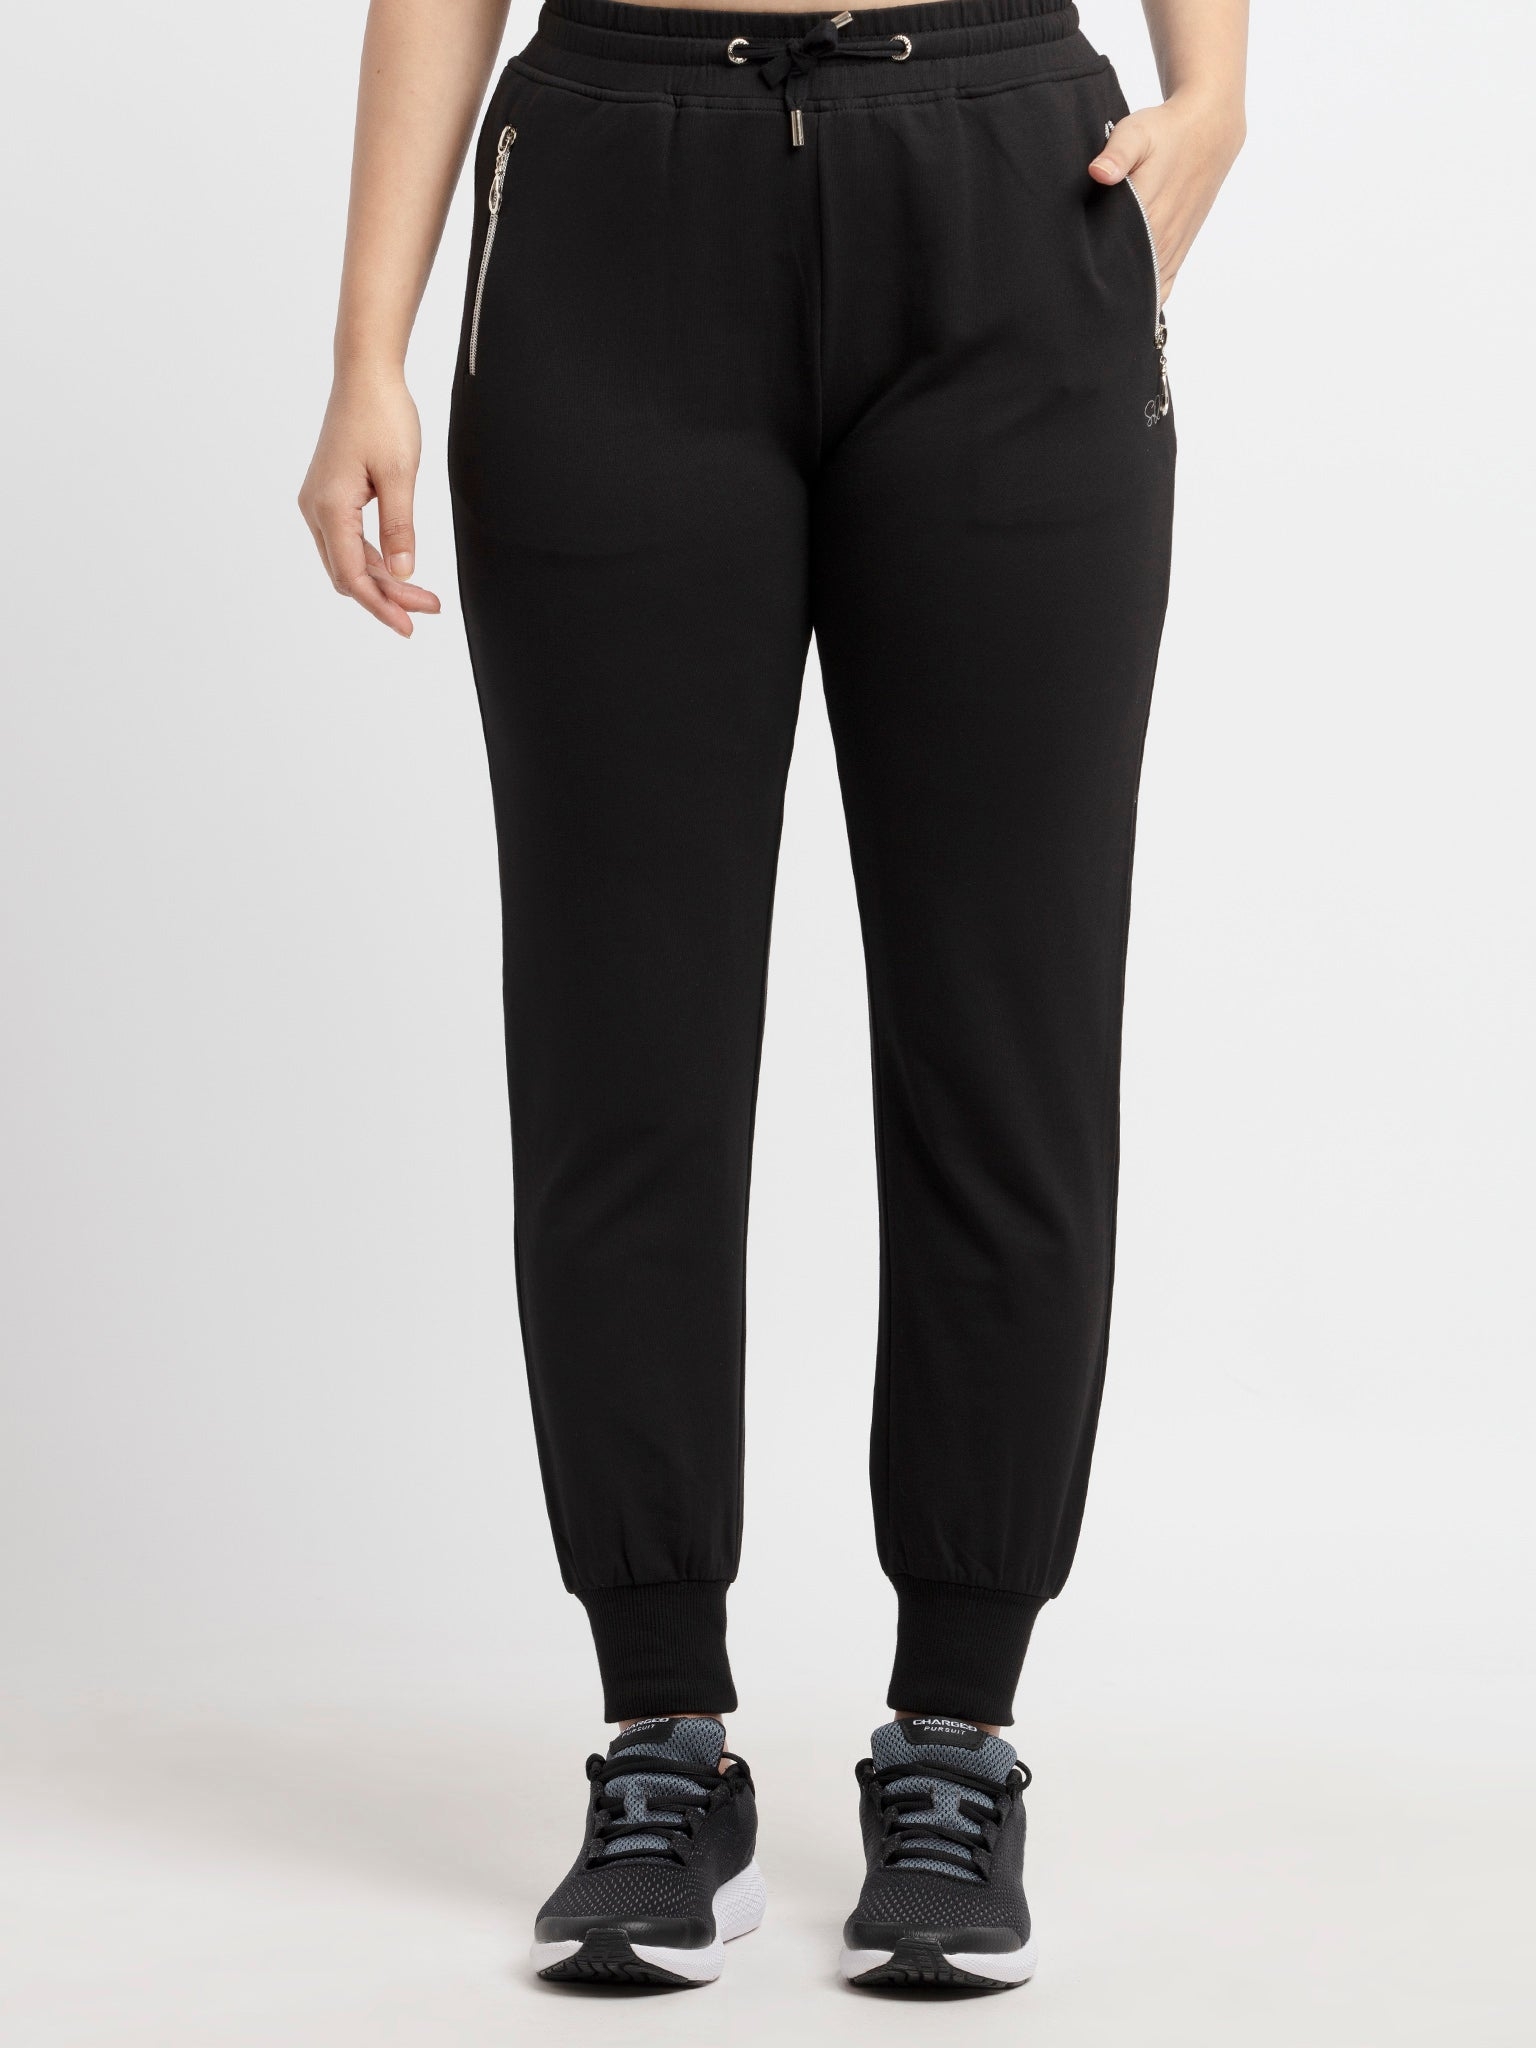 Status Quo | Women'ss Full length Solid Joggers 0